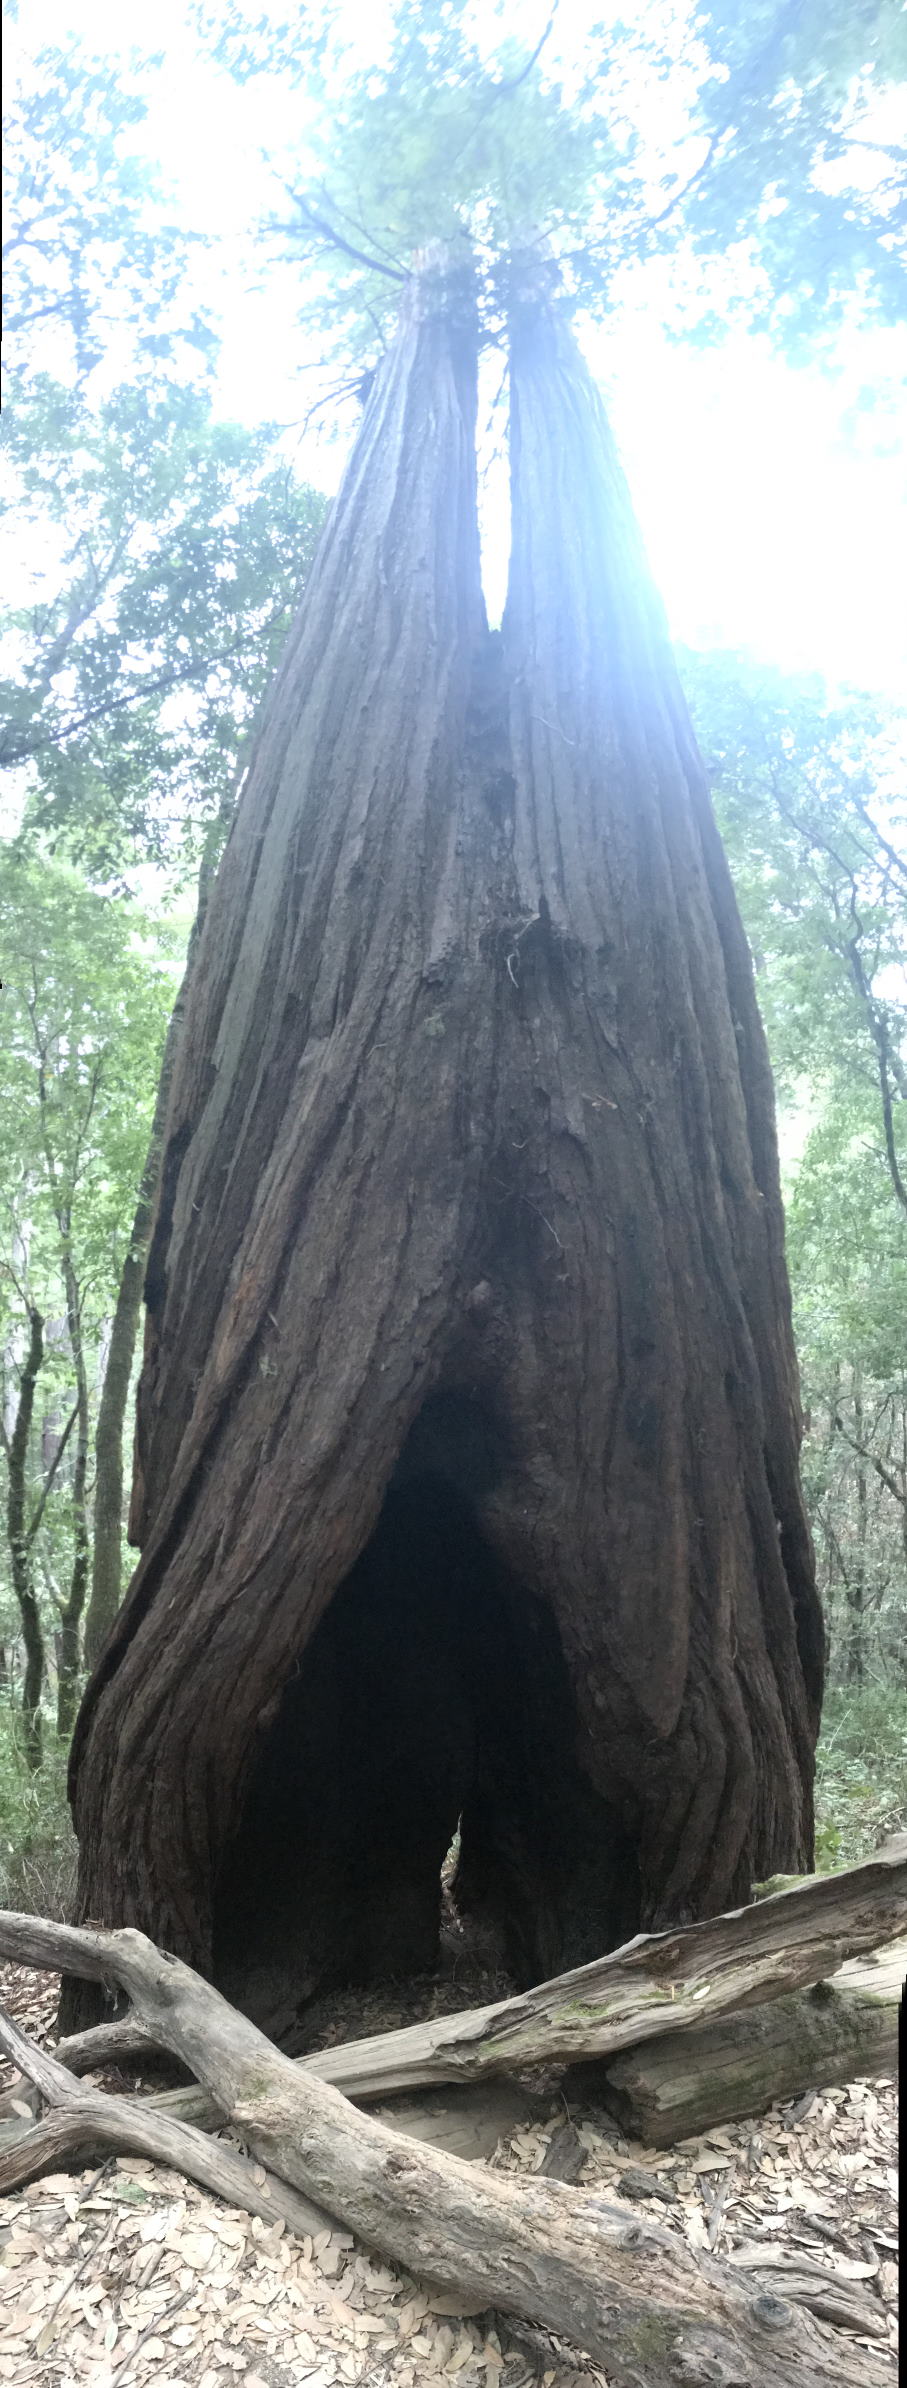 The two redwoods growing up together